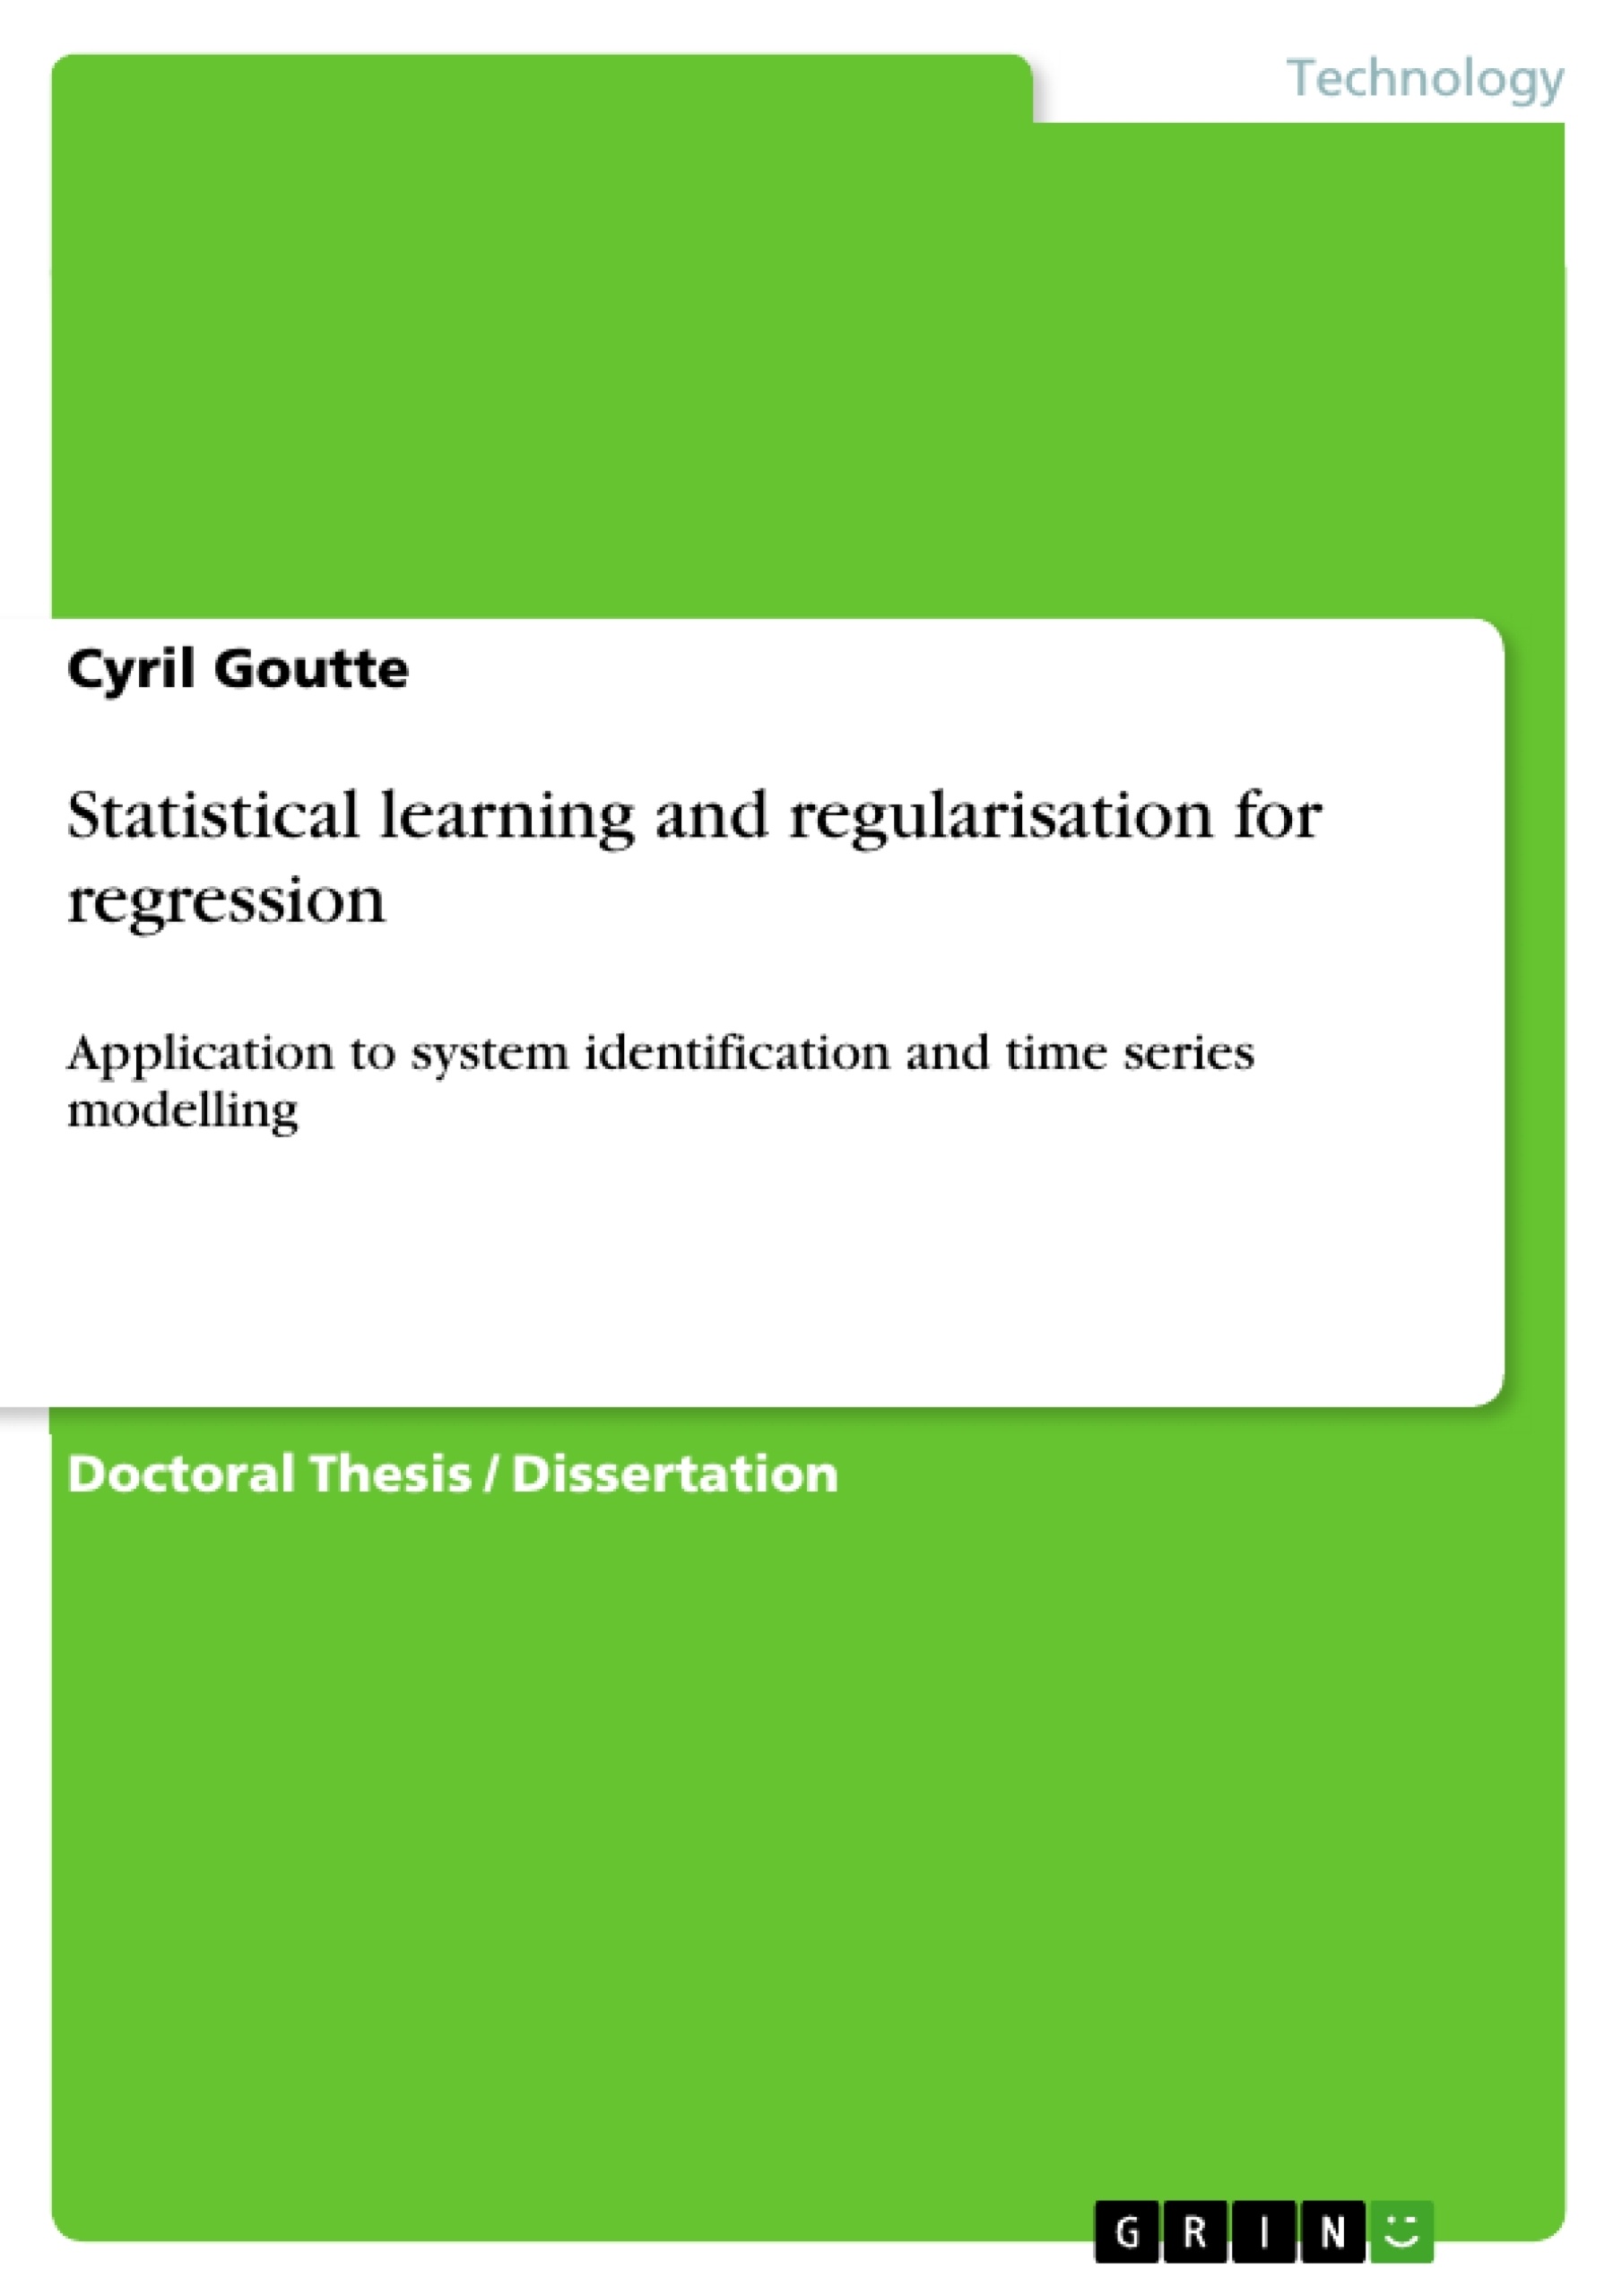 Title: Statistical learning and regularisation for regression